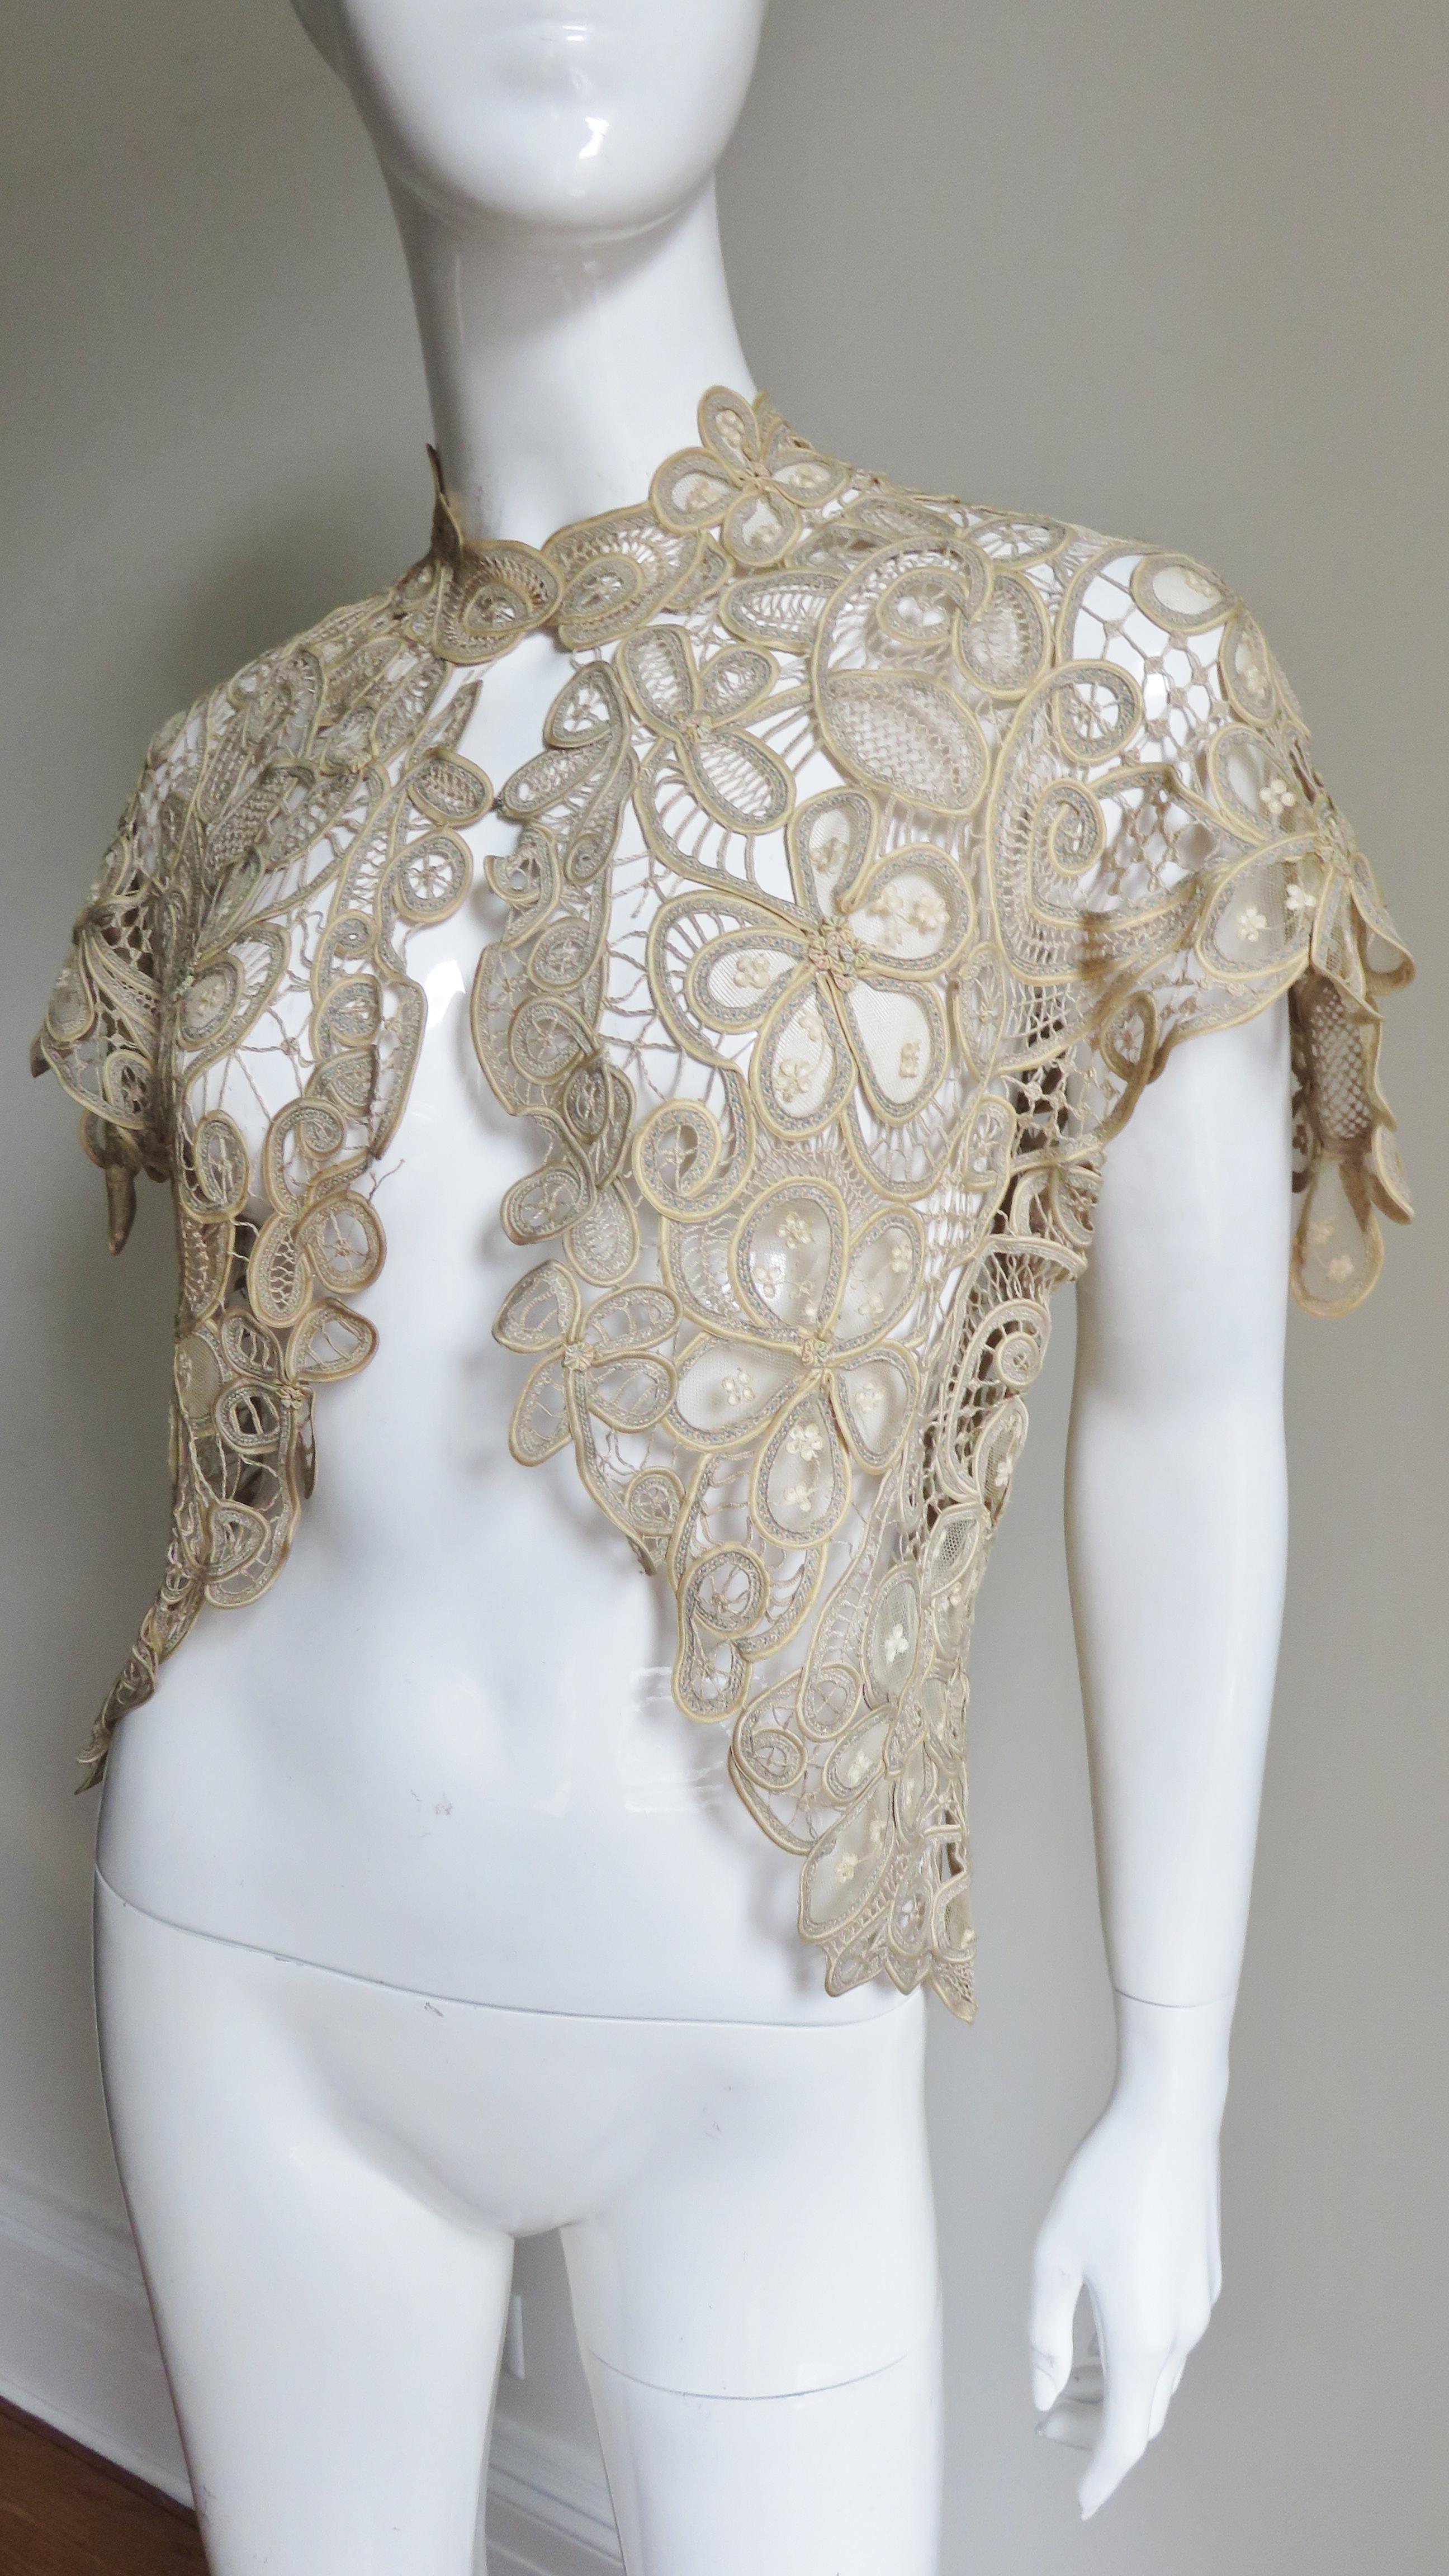 Silk Guipure Lace Exquisite 1930s Jacket Top In Good Condition For Sale In Water Mill, NY